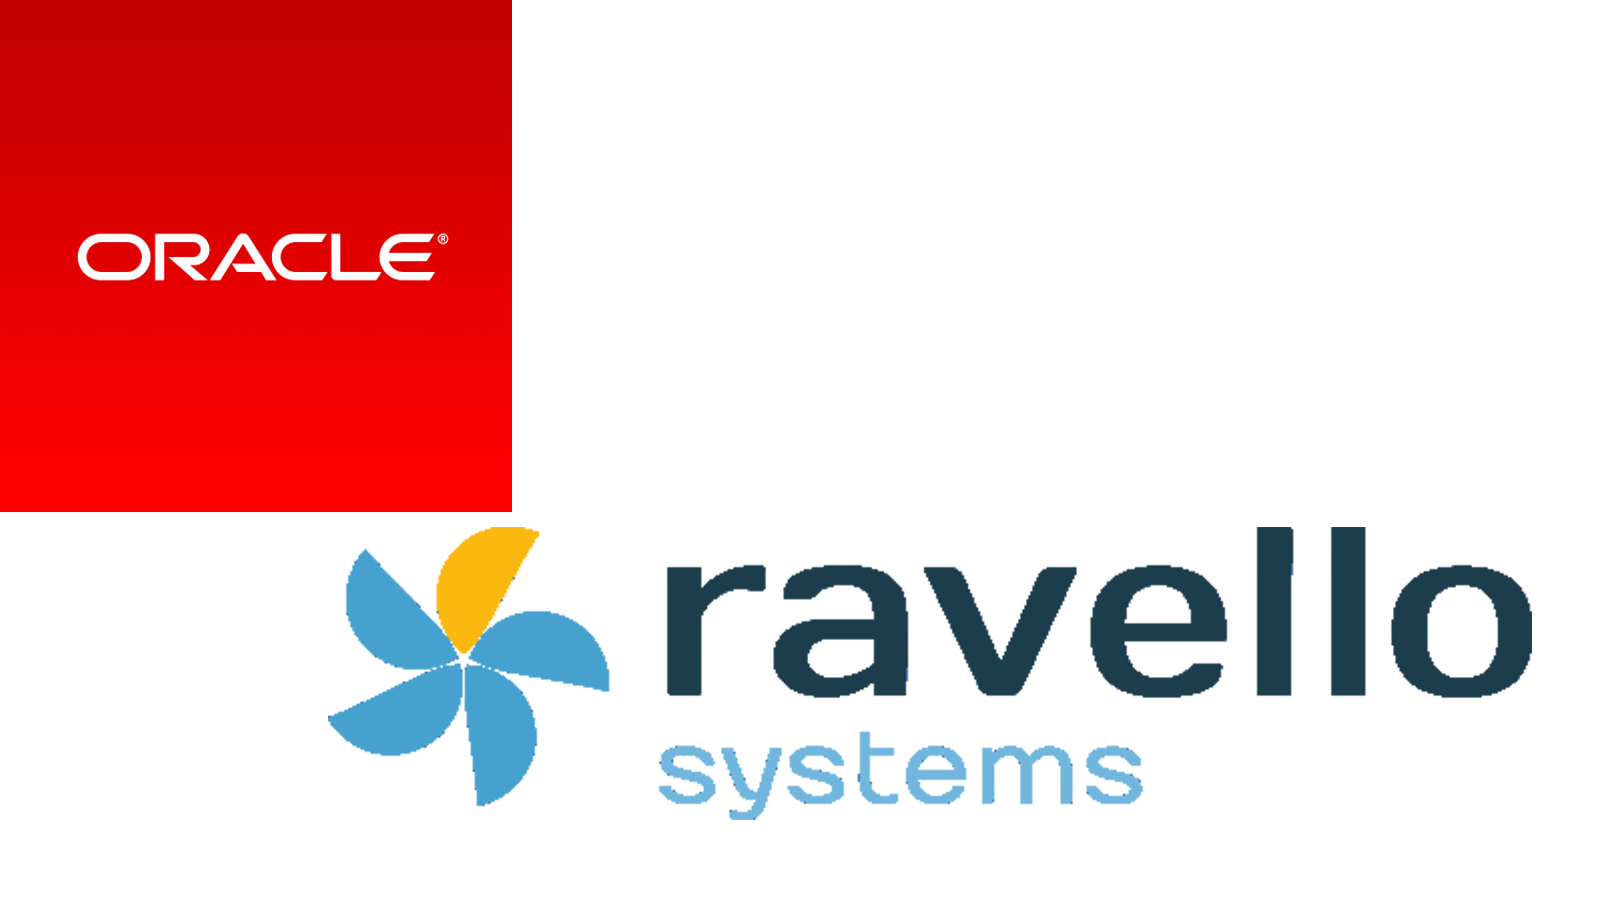 On Feb. 22, 2016, Oracle acquired Israel’s Ravello Systems.